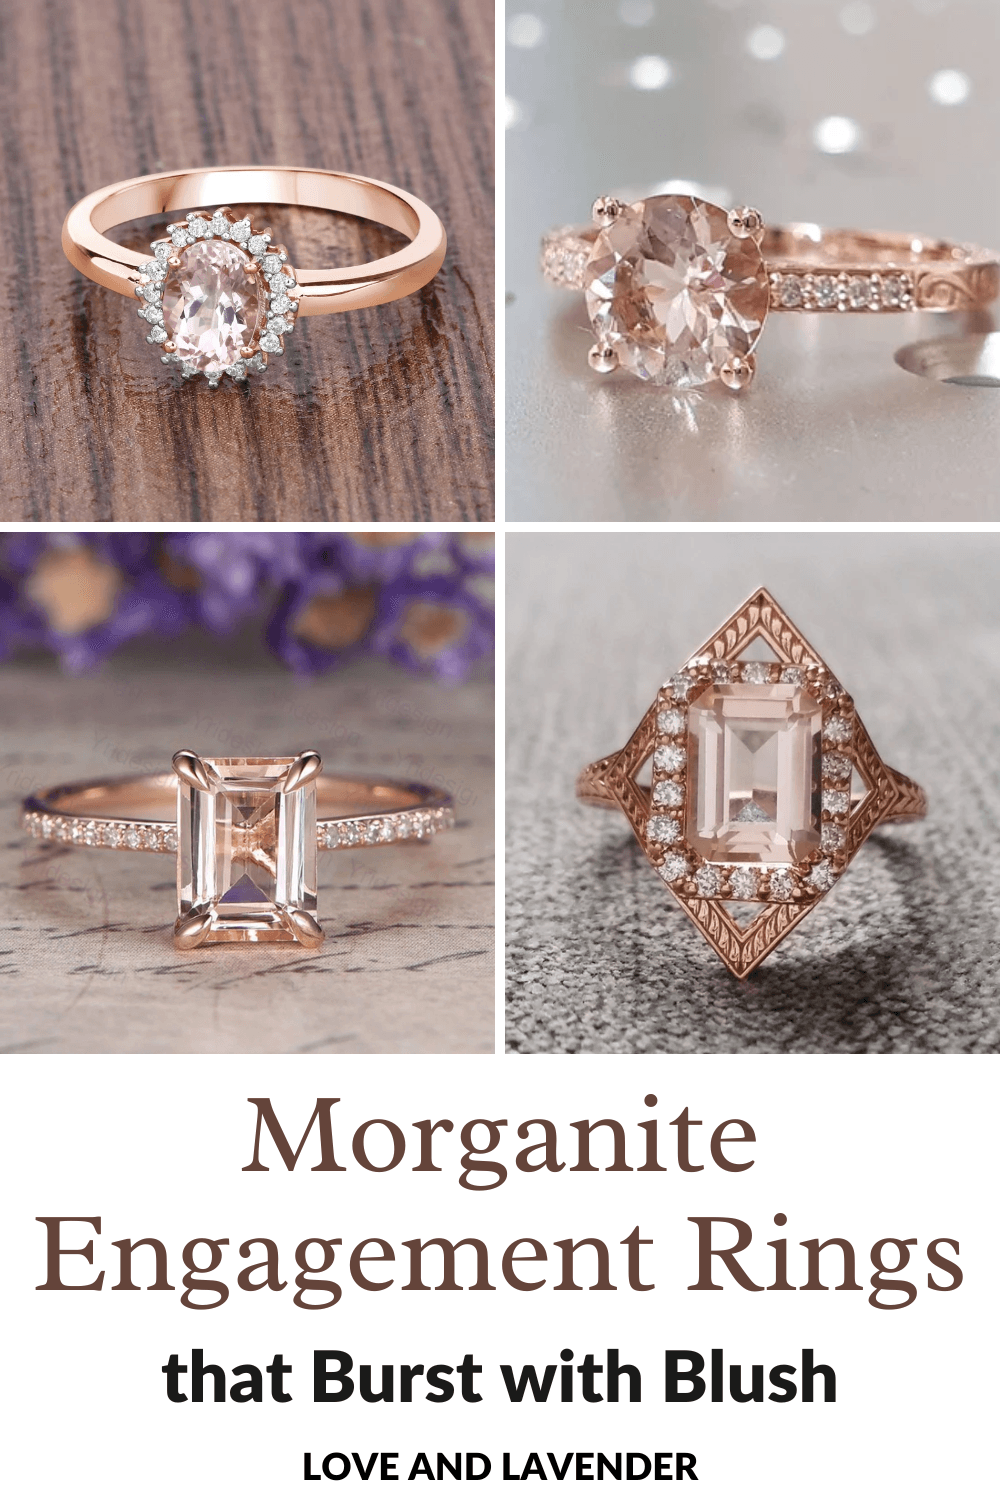 If you're looking for a unique engagement ring, you can try Morganite! A Morganite engagement ring comes in many different styles with a myriad of unique options. We make sure that every ring is perfect for your style, engagement, and future together. Head over to the blog to see our curated list!